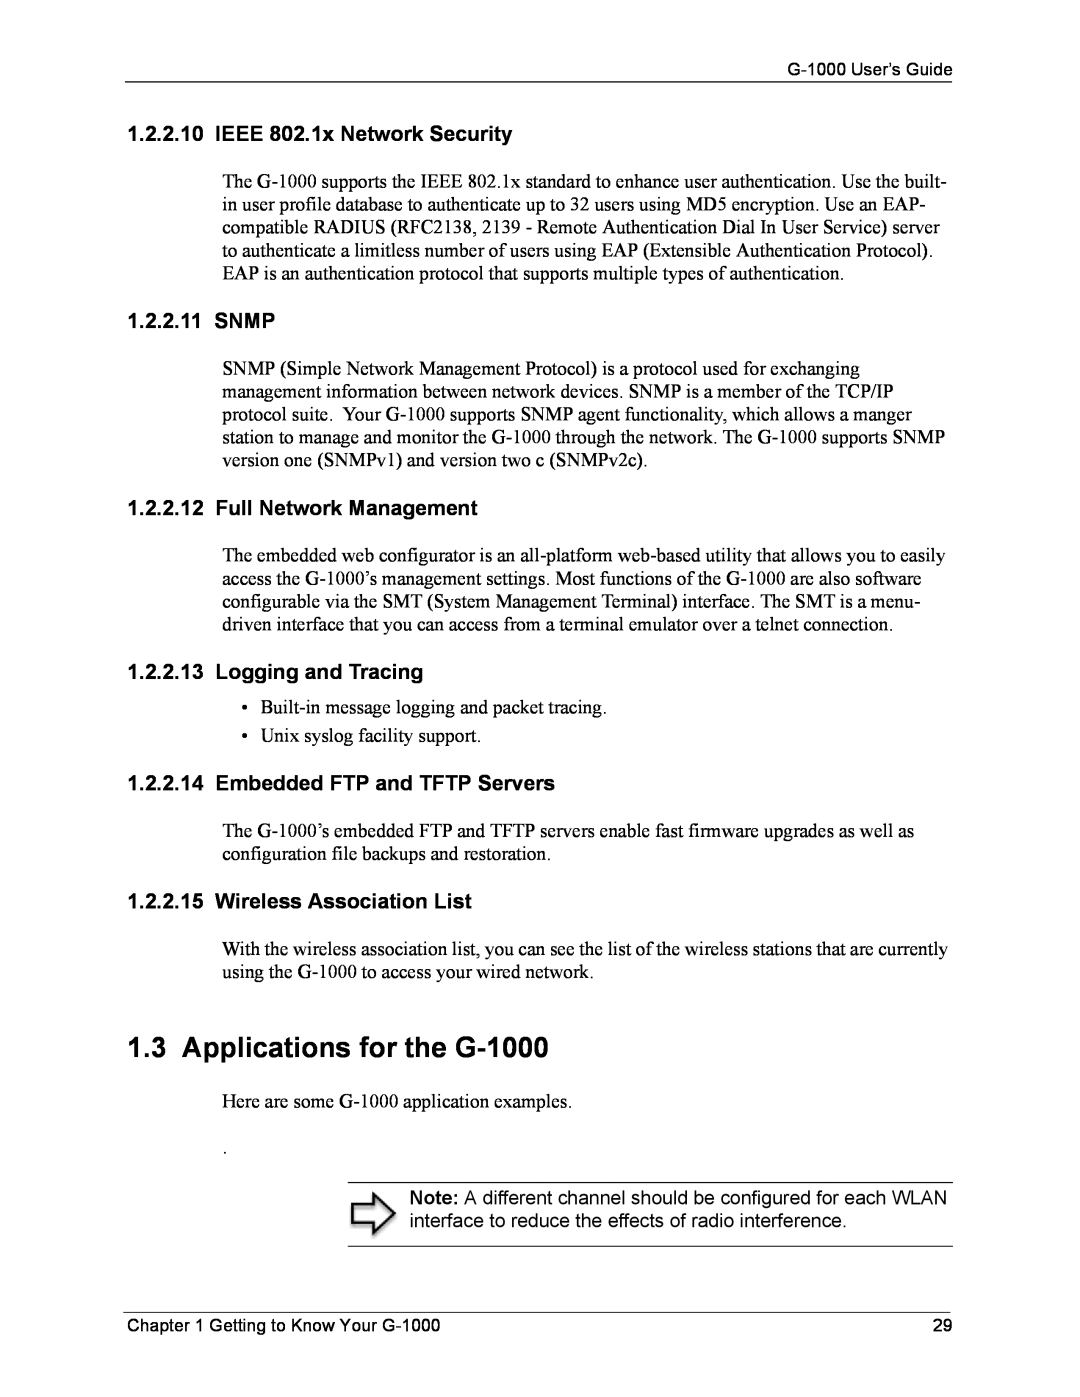 ZyXEL Communications manual Applications for the G-1000, IEEE 802.1x Network Security, Snmp, Full Network Management 